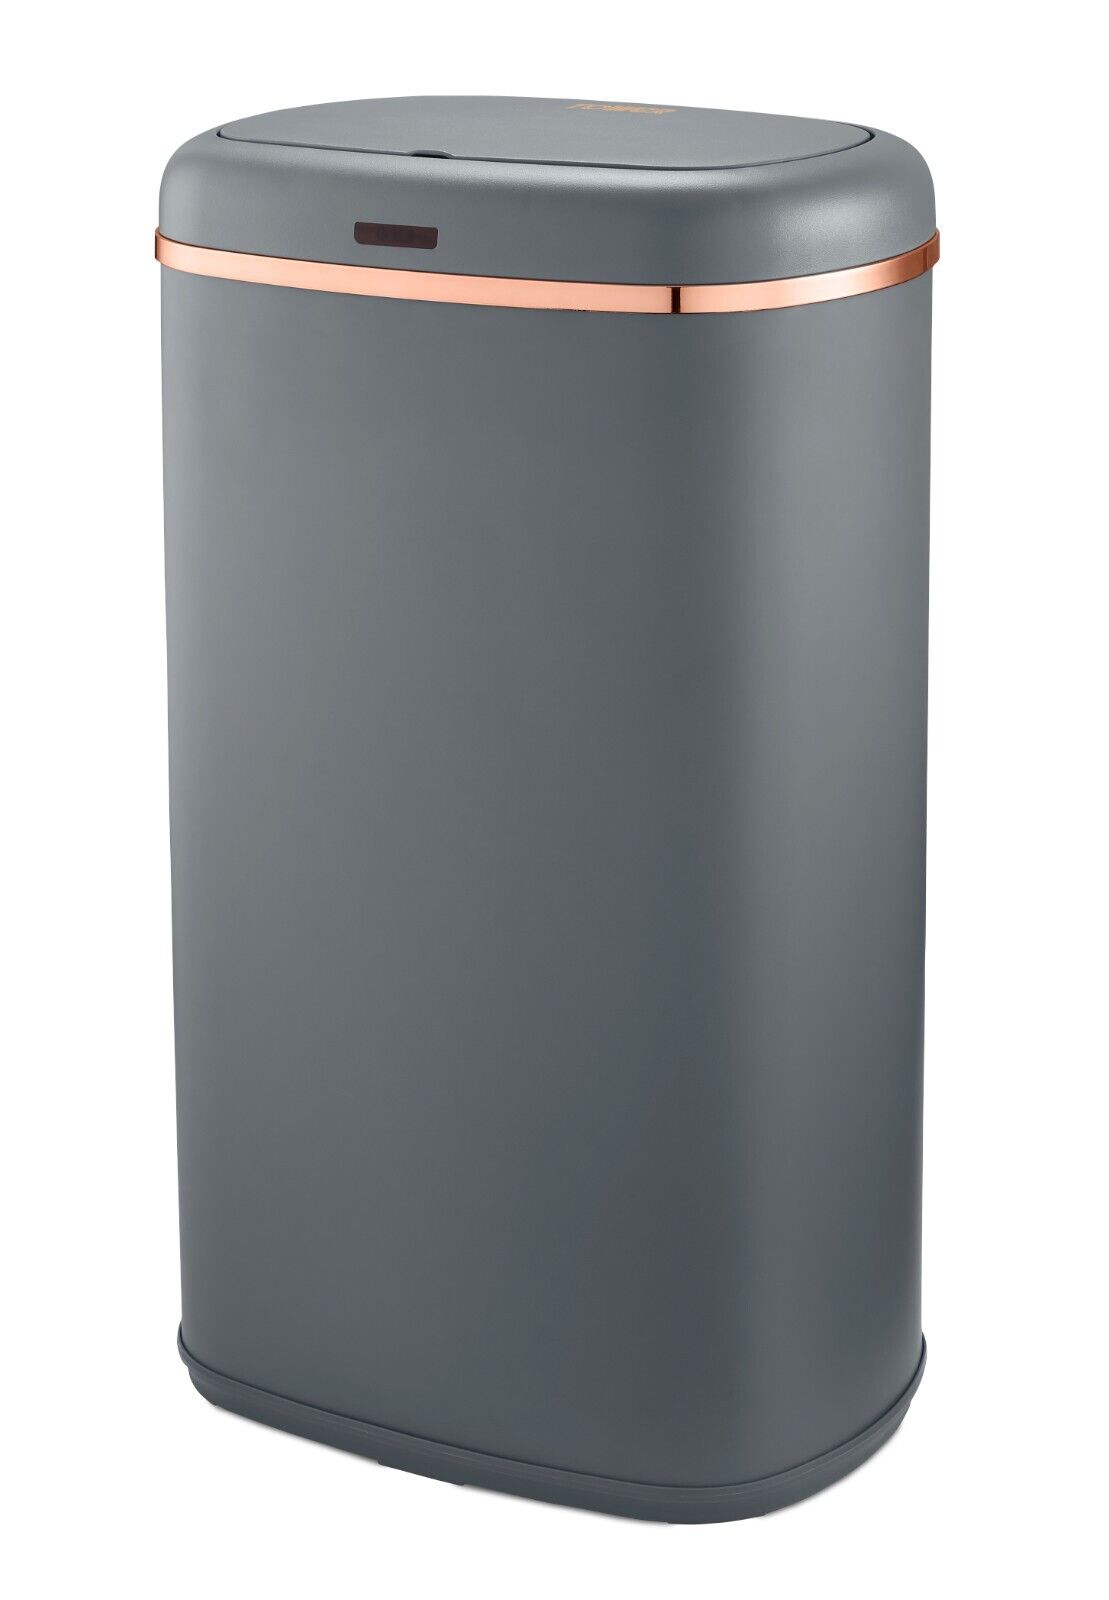 Tower Cavaletto Square 58L Sensor Bin Grey/Rose Gold Household Bin  Automatic Lid T838010GRY